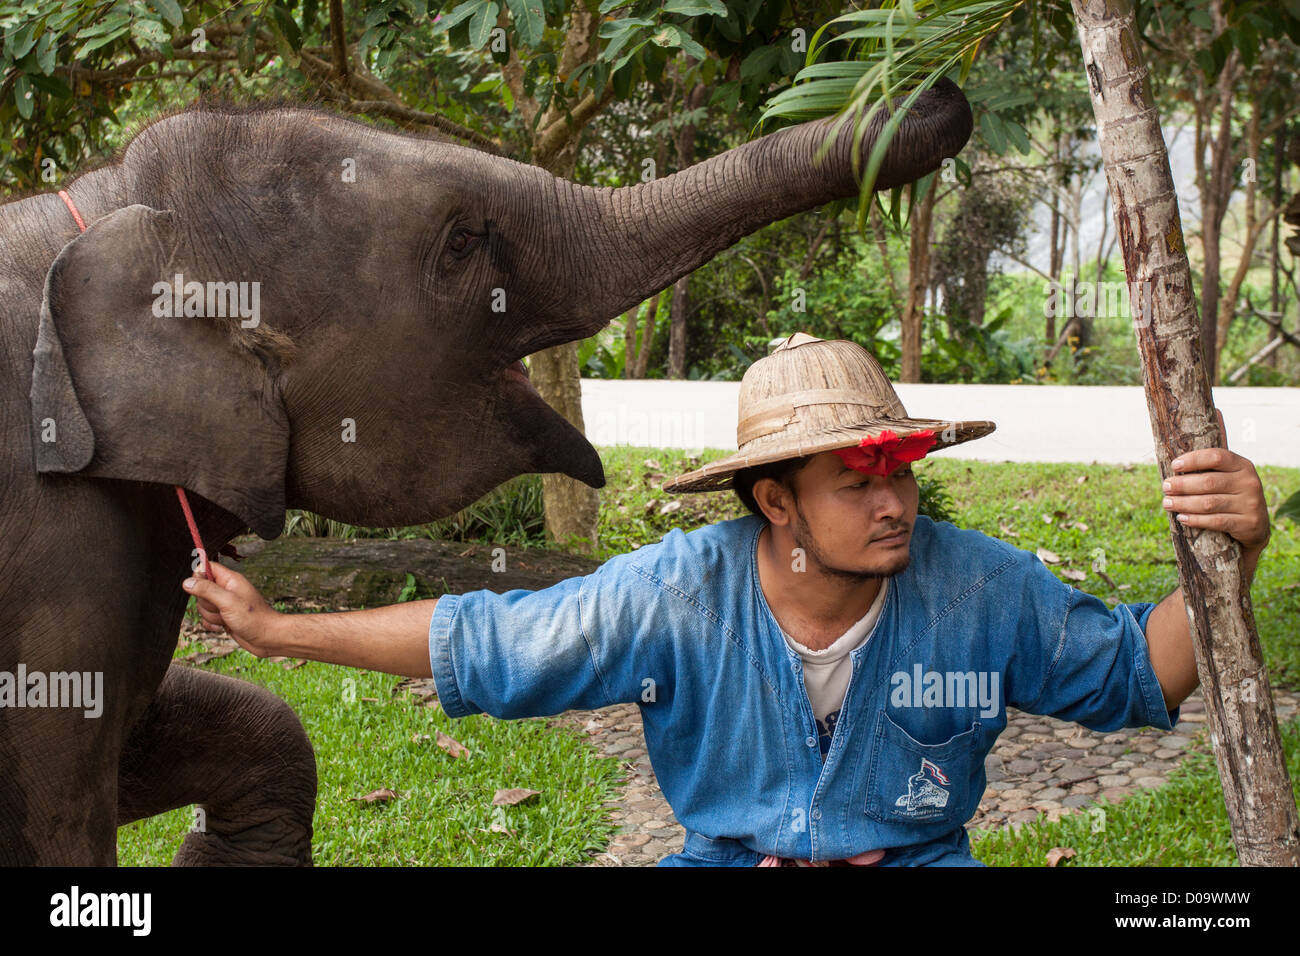 OWNER HAVE DIFFICULTY CONTROLLING HIS YOUNG TROUBLESOME GREEDY ELEPHANT THAI ELEPHANT CONSERVATION CENTER LAMPANG THAILAND ASIA Stock Photo